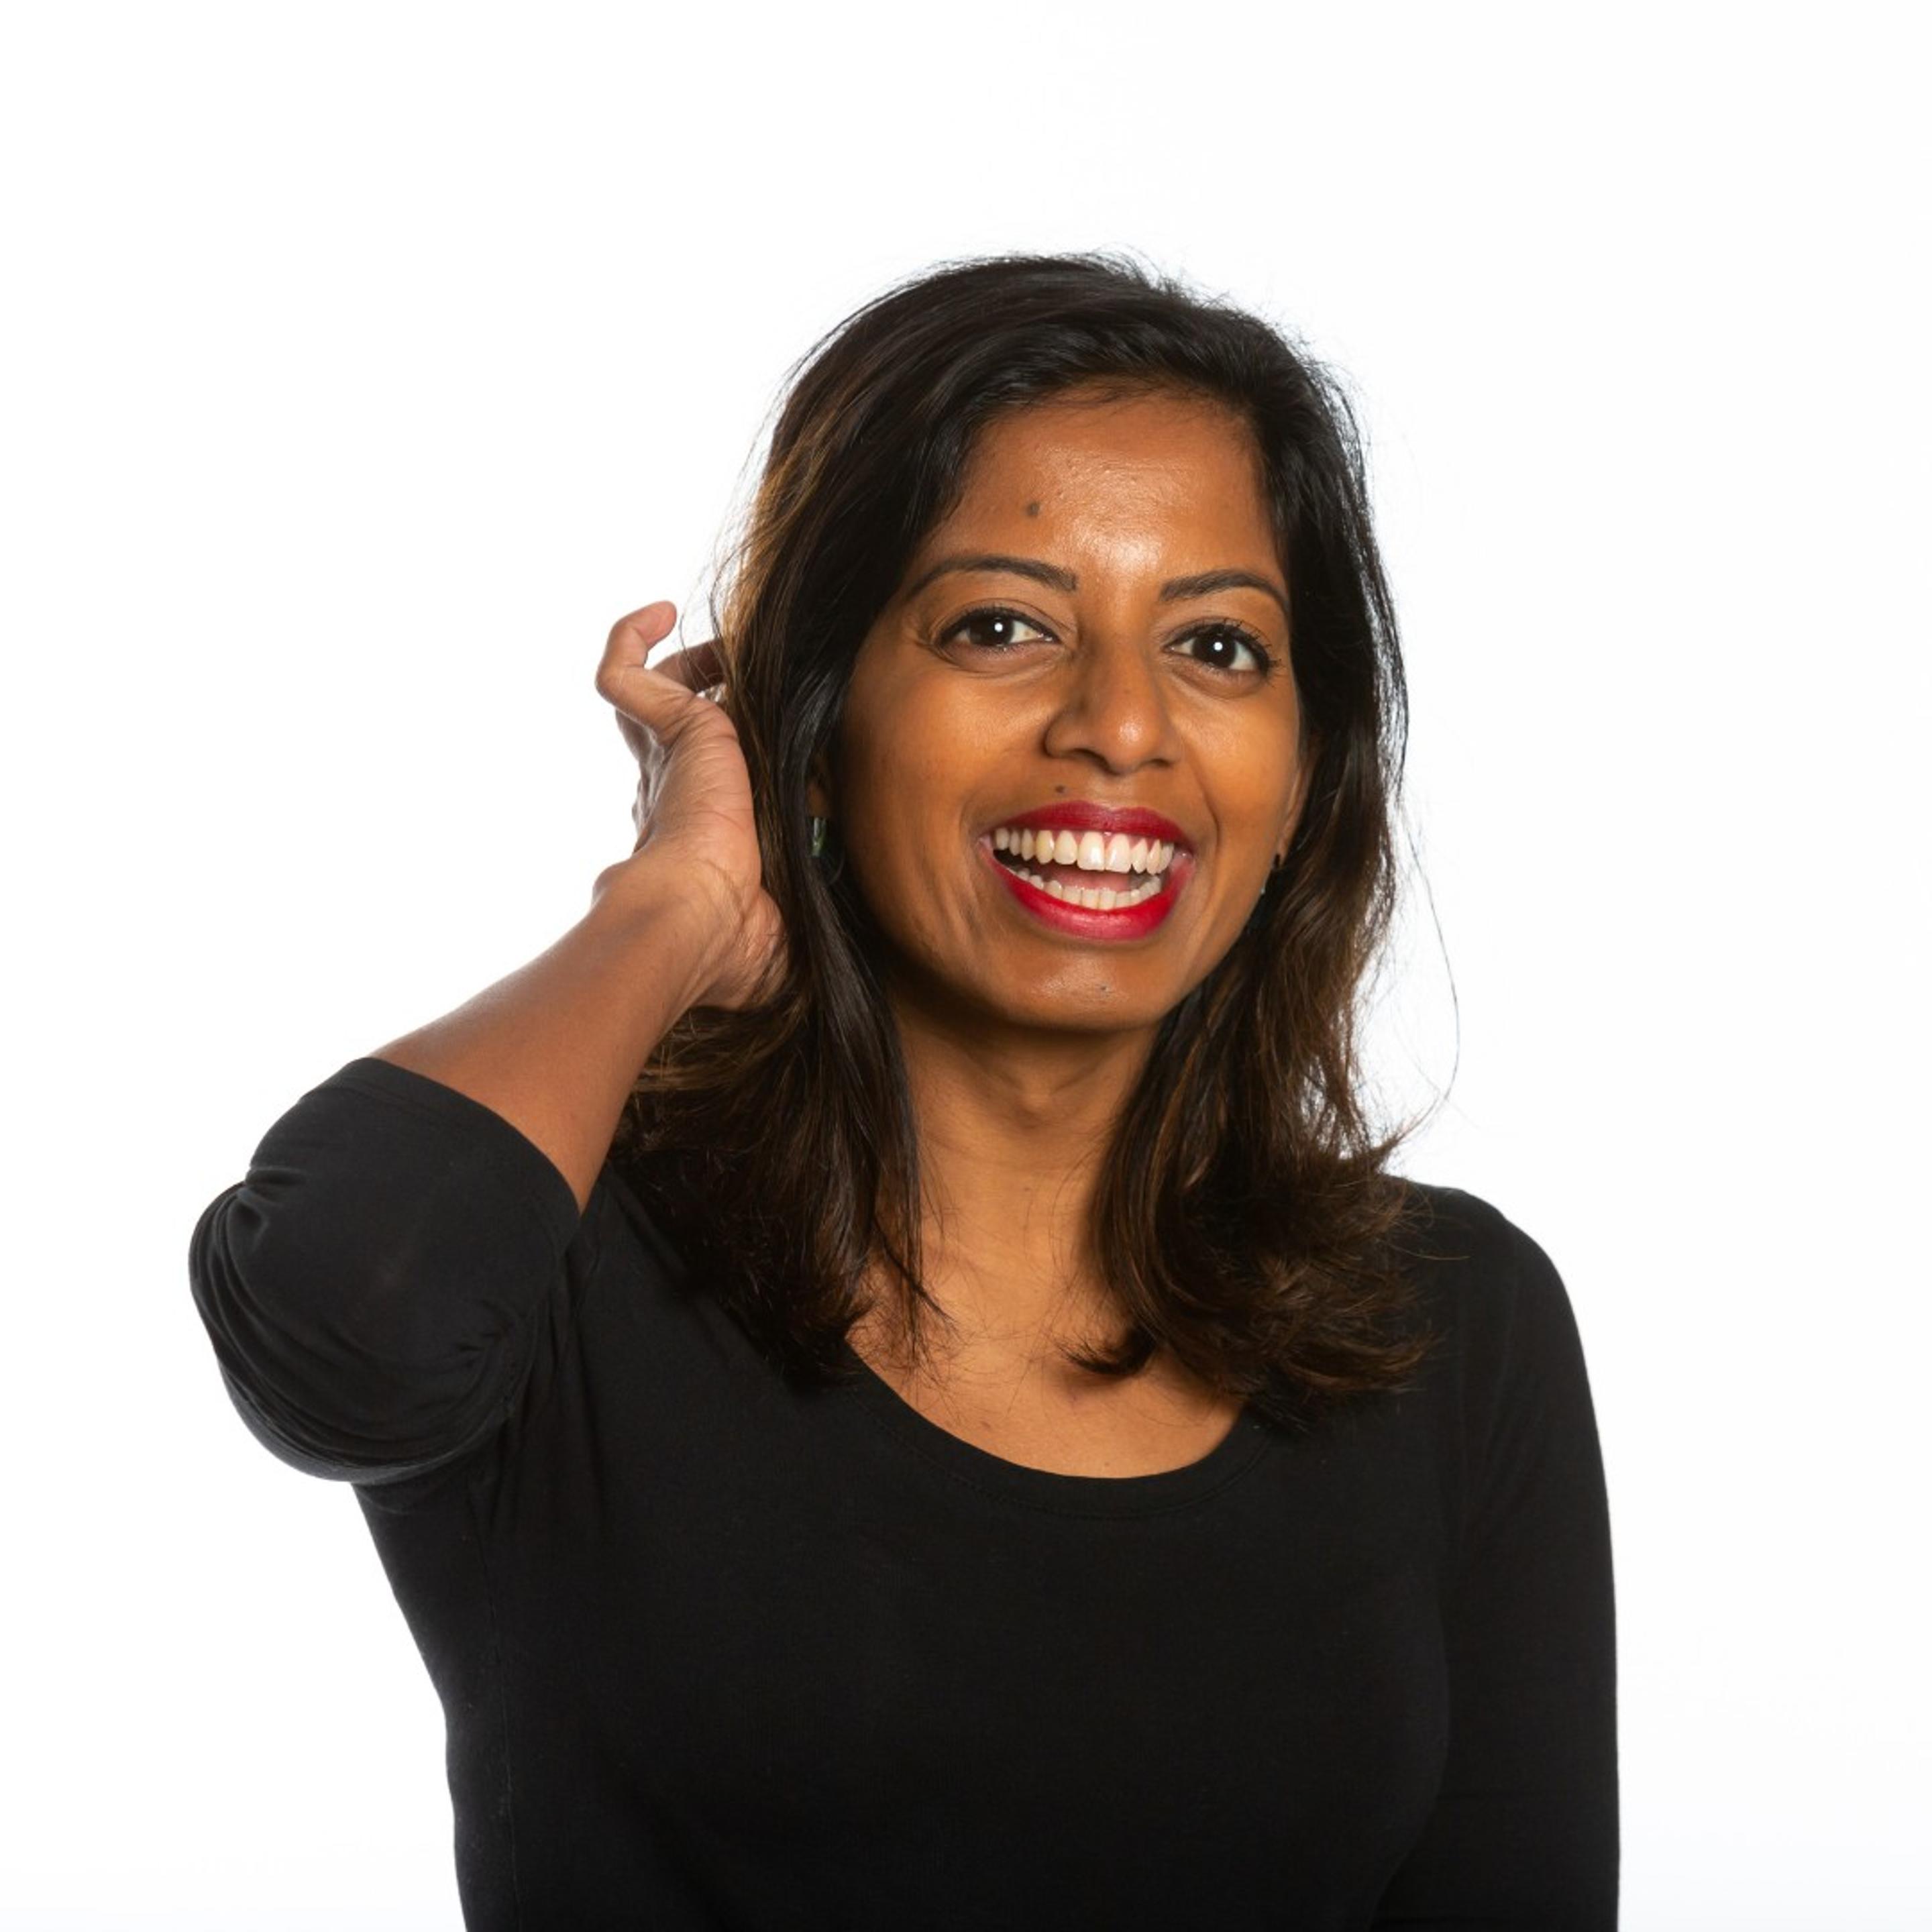 Comedian Sashi Perera smiles at the camera while tucking her hair behind her ear